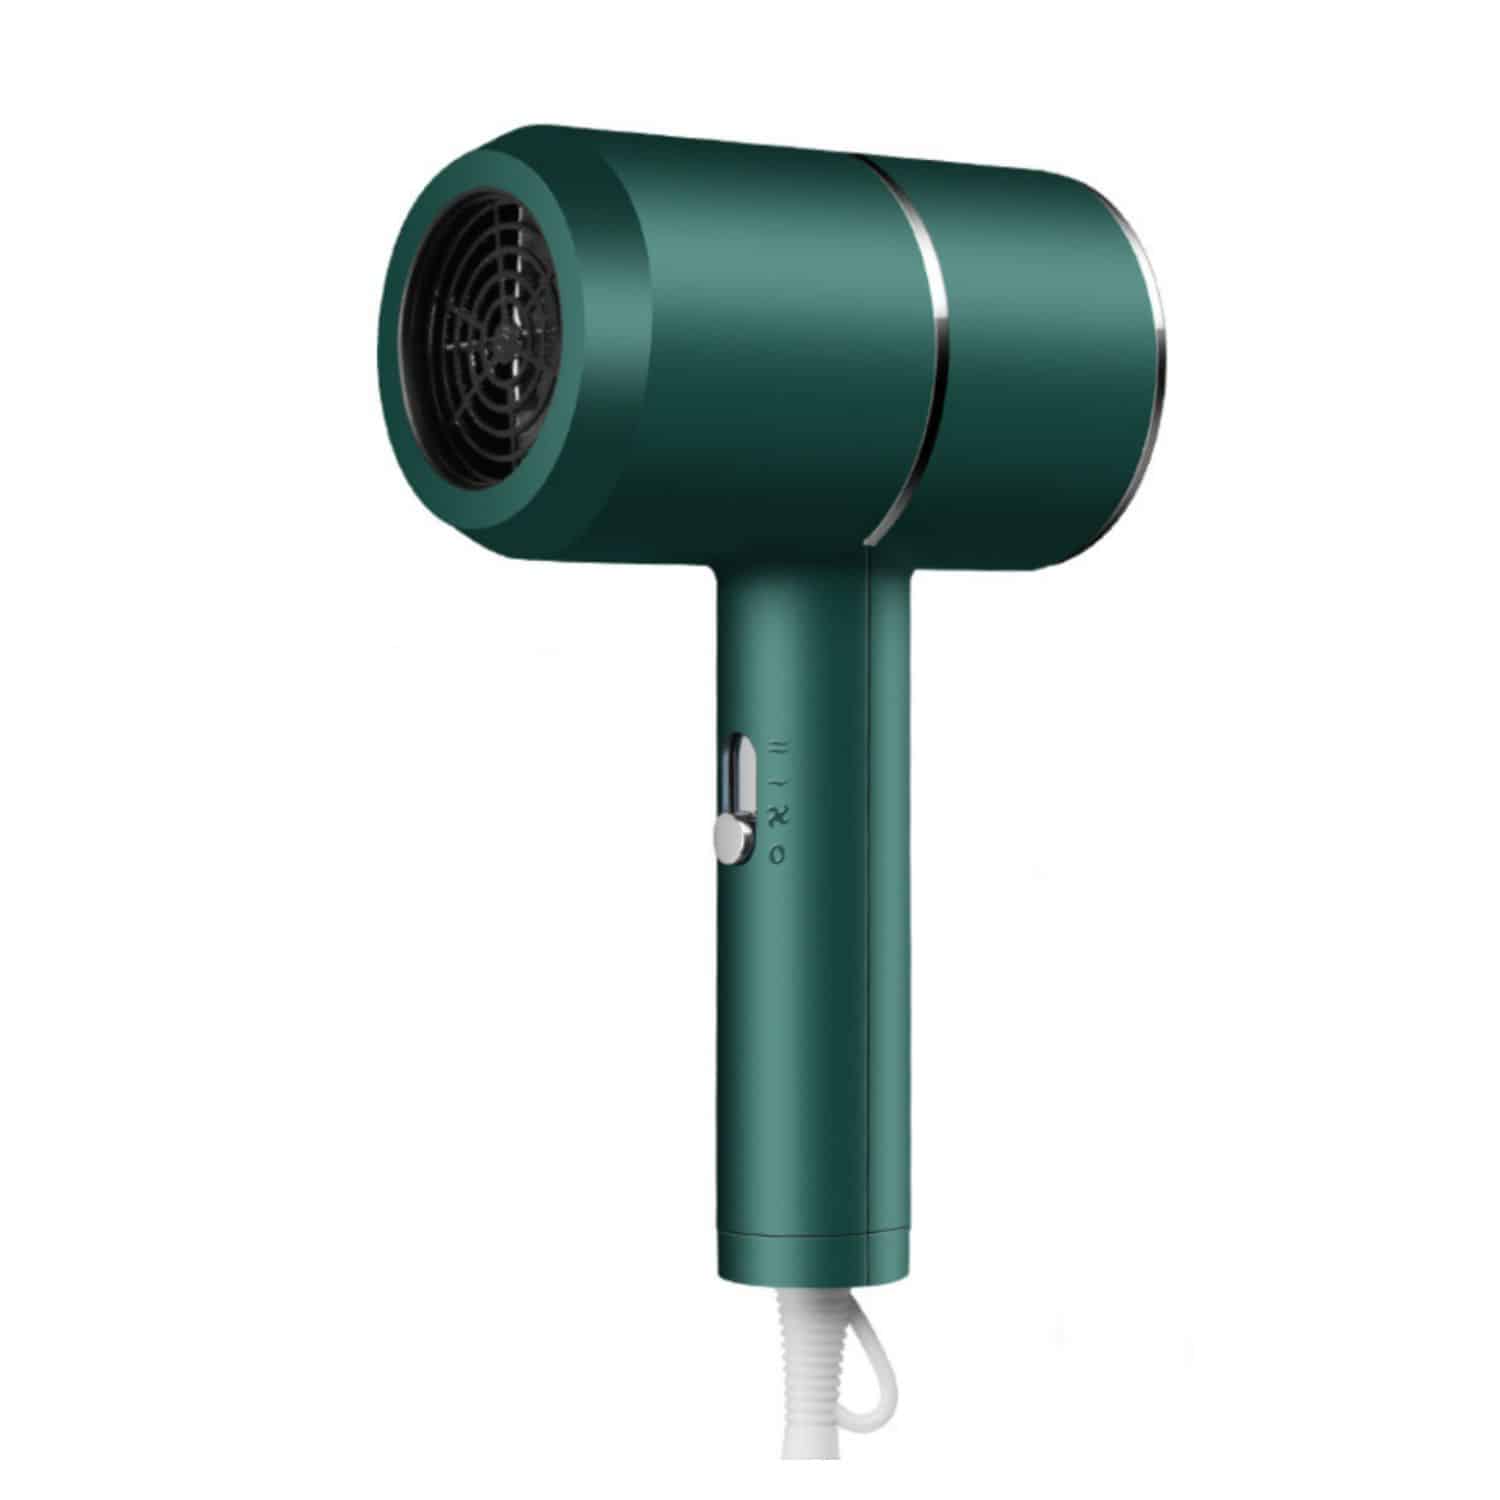 Compact Ionic Hair Dryer for Fast and Healthy Drying | SHOPEE MALL ...